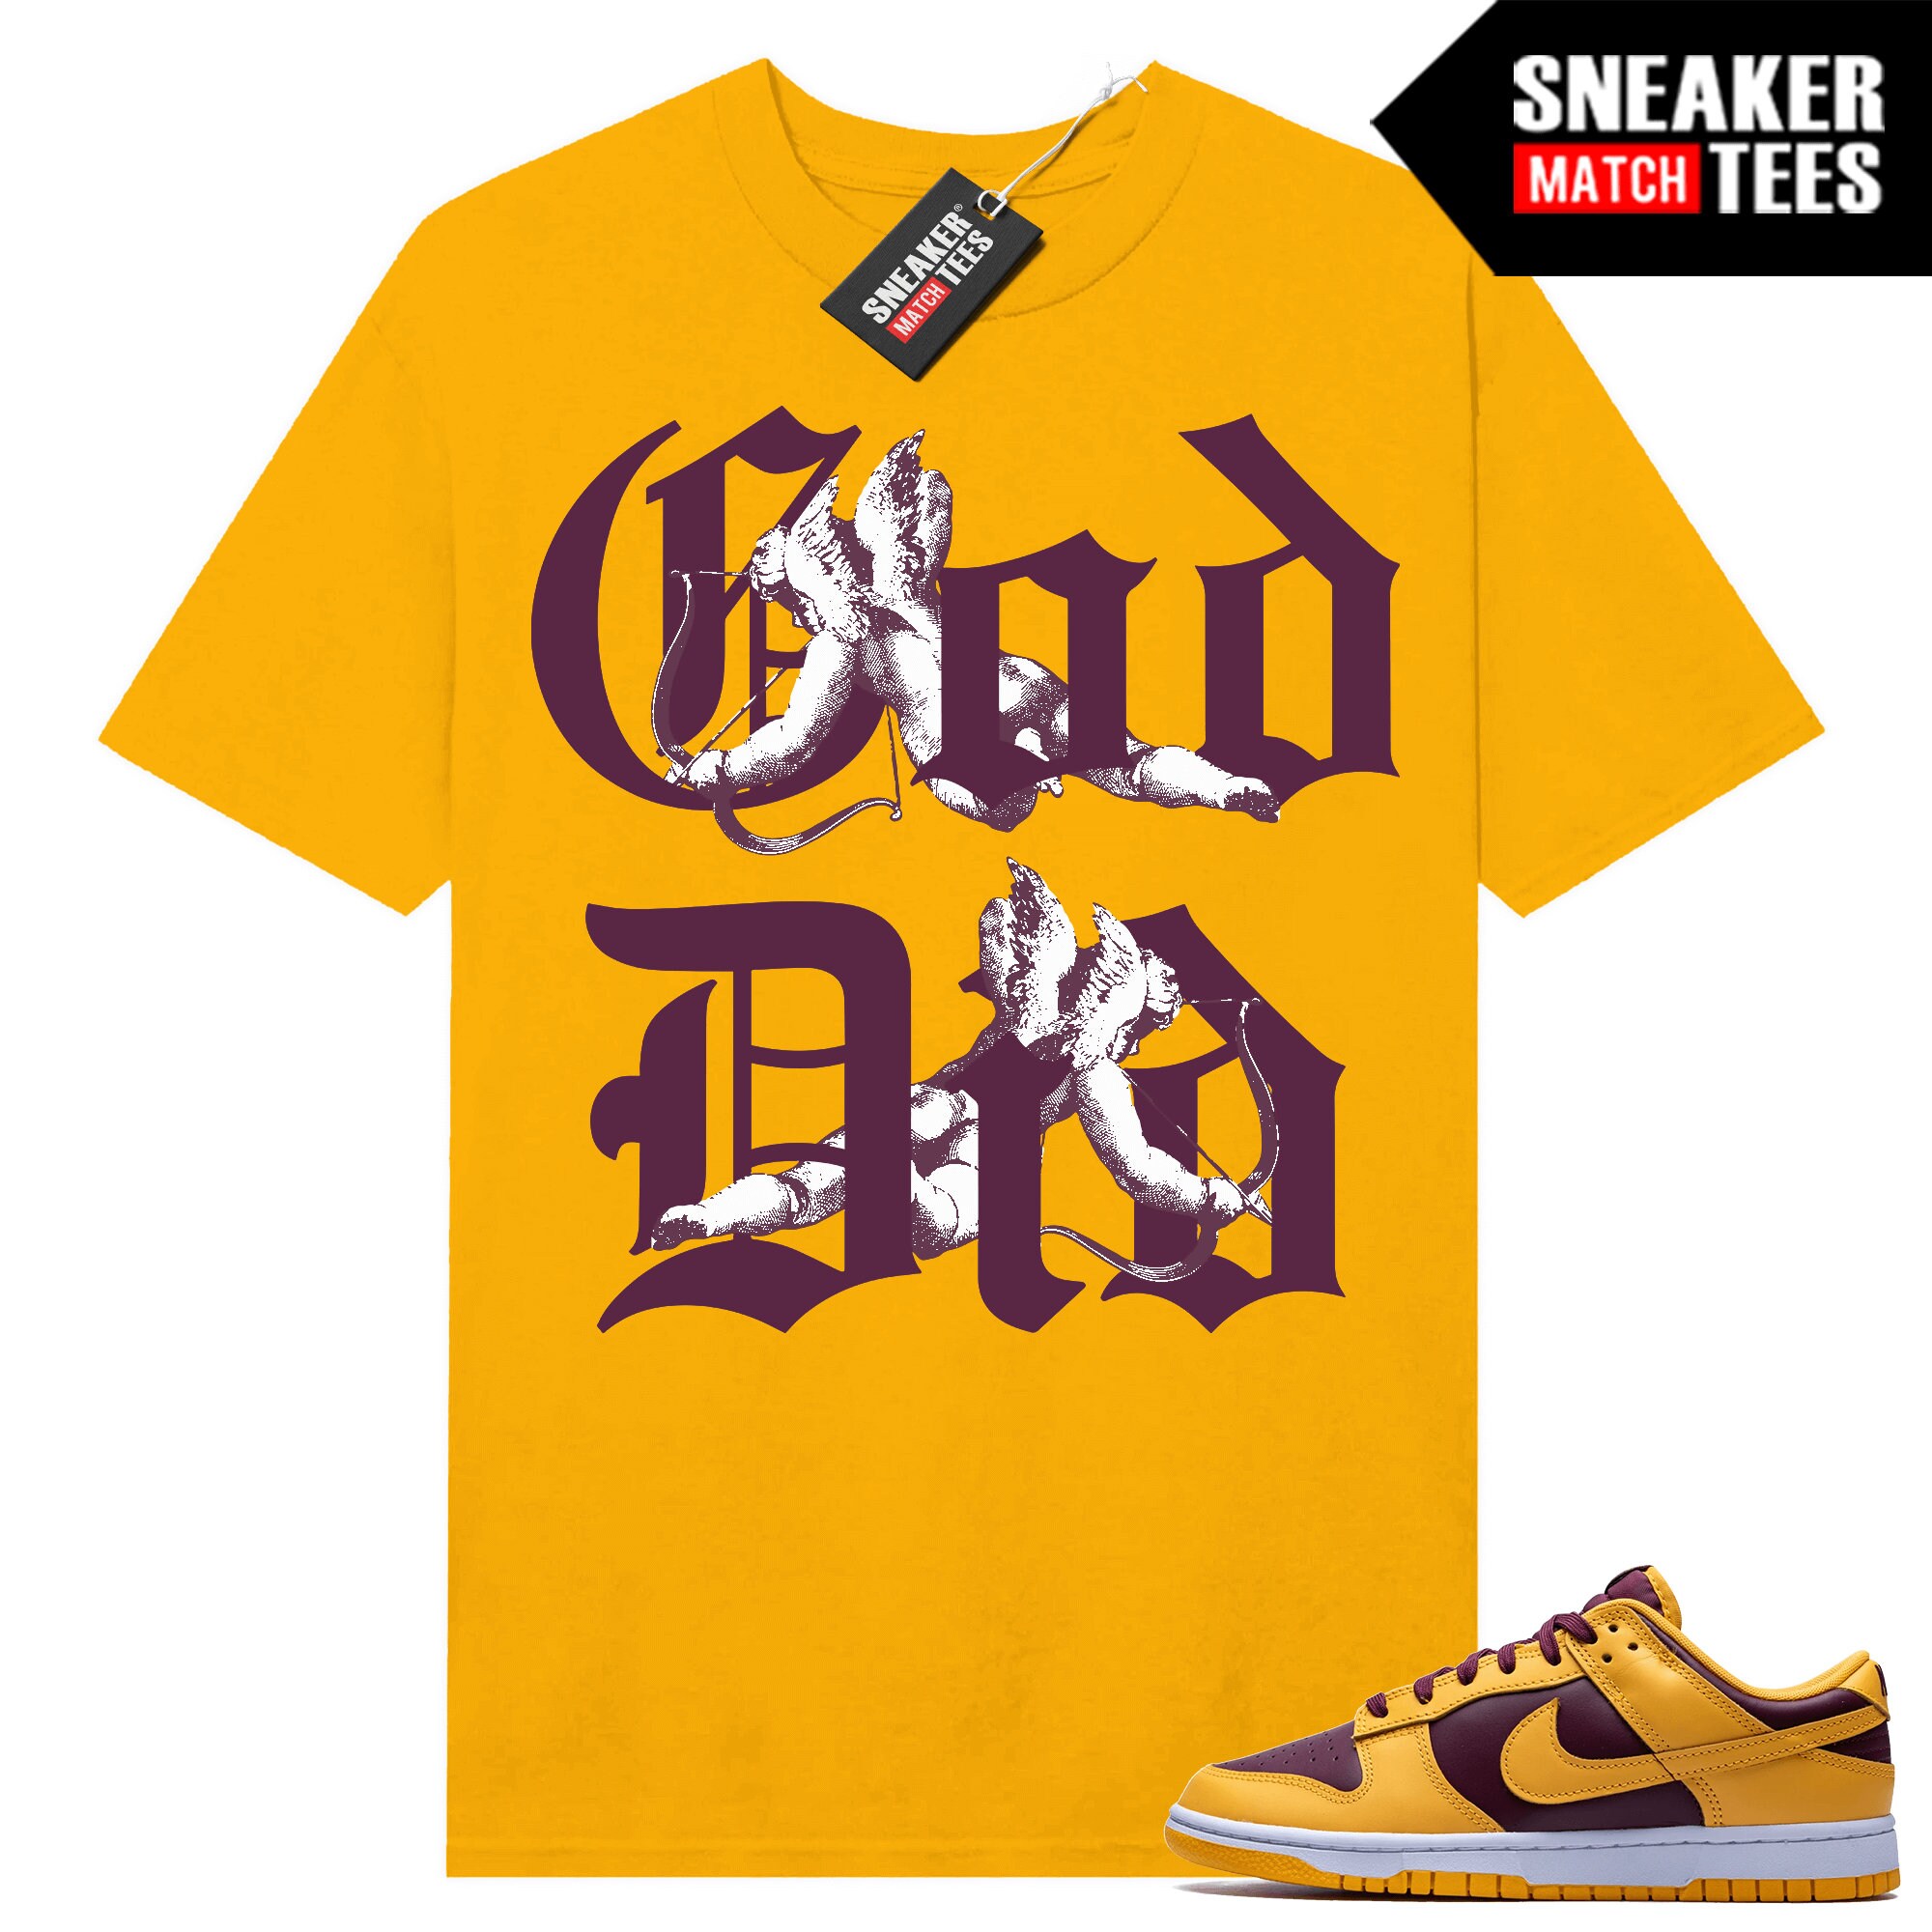 Arizona State Dunk Low to match Sneaker Match Tees Gold "God Did"